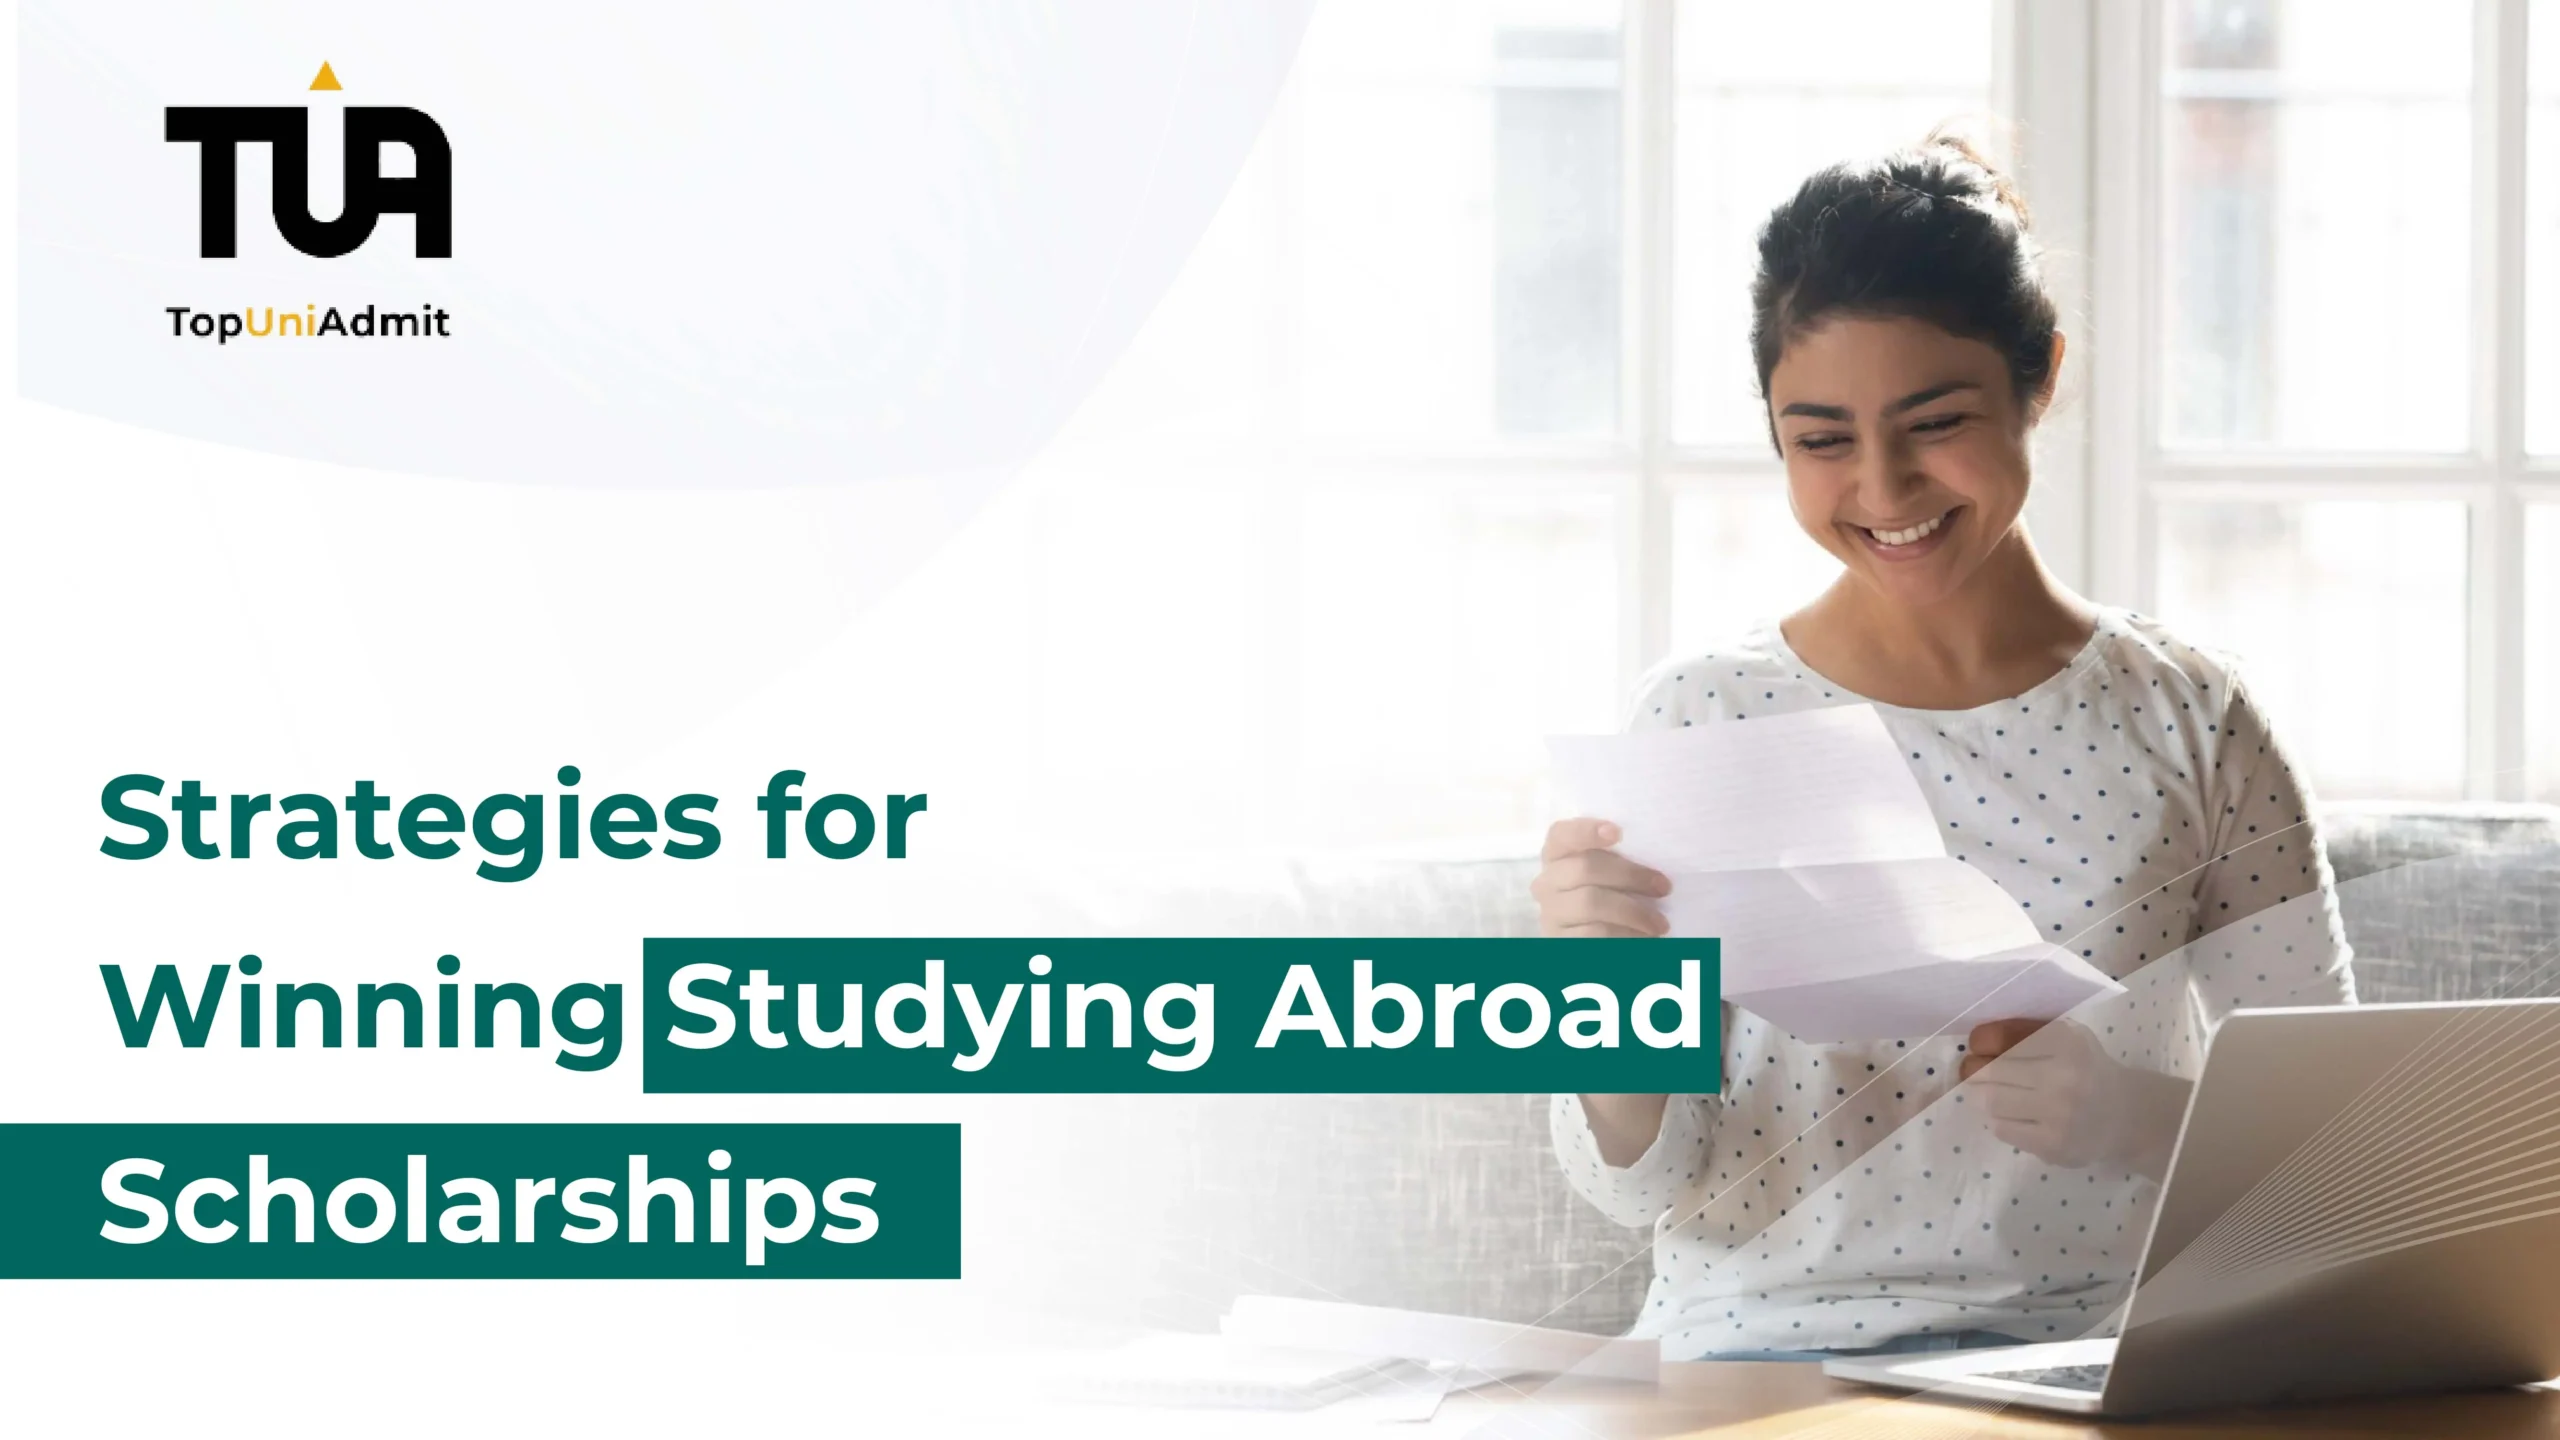 Studying Abroad scholarships